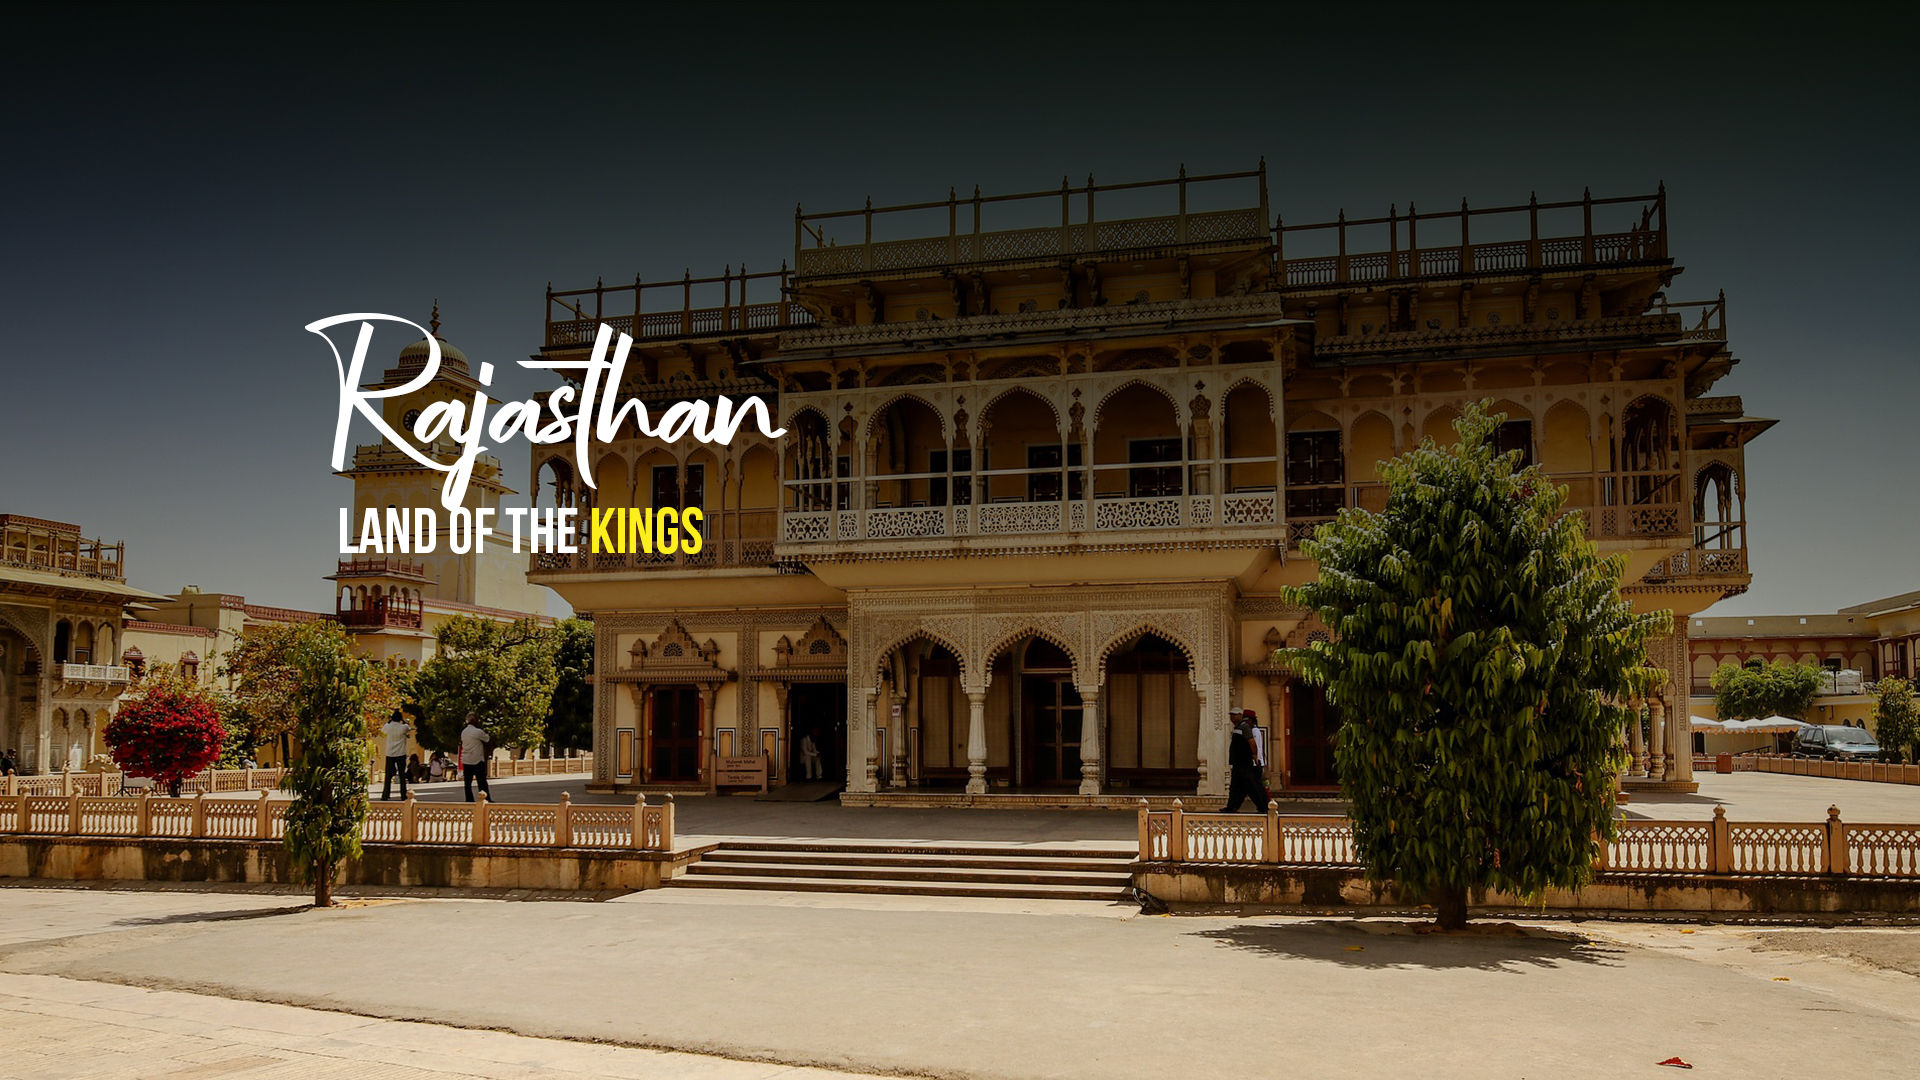 Rajasthan Tour packages : Book Rajasthan Tours and Holiday Packages